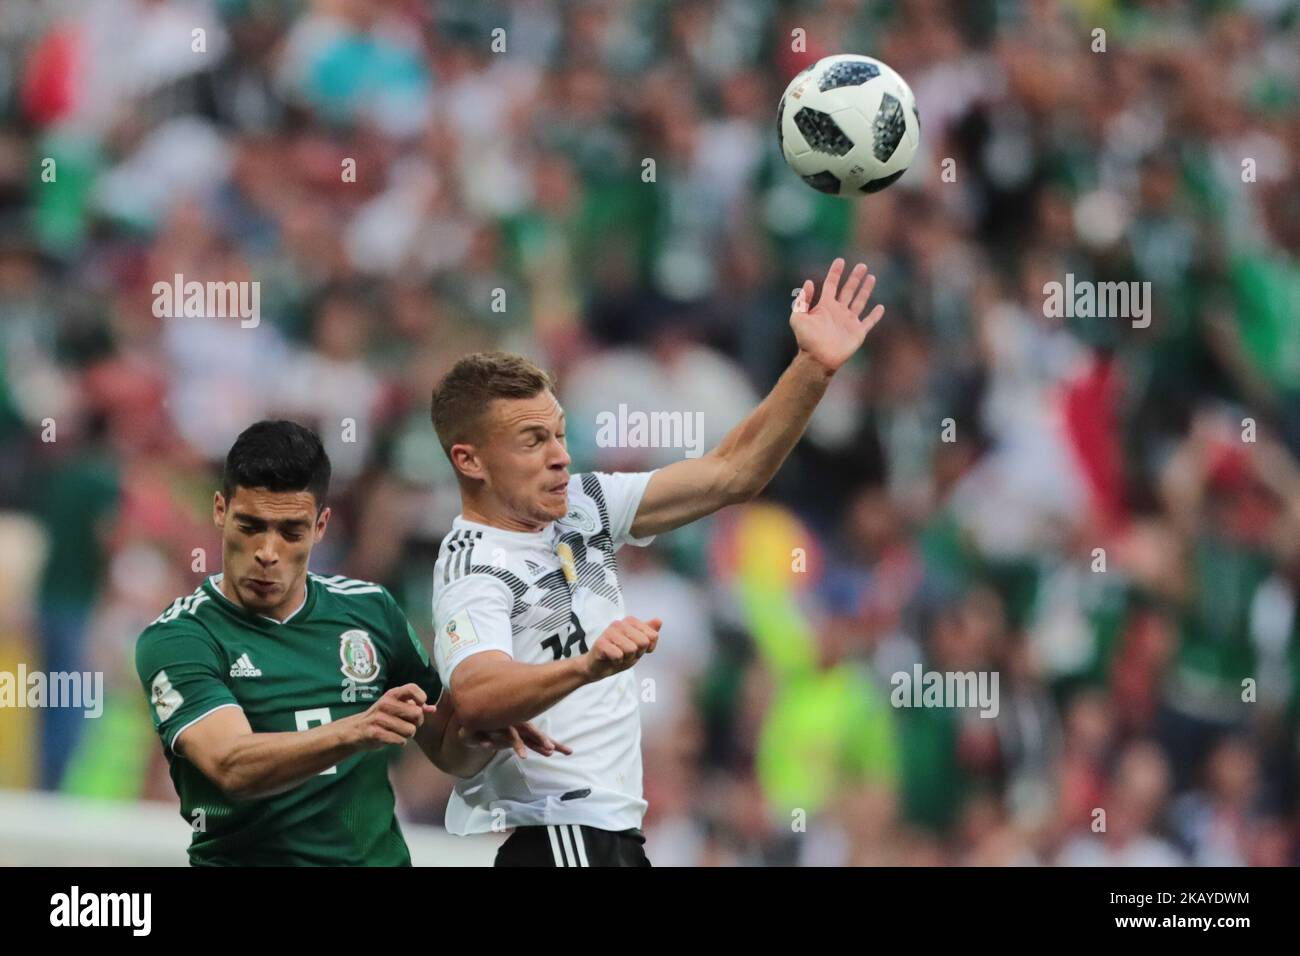 forward Marco Fabian of Mexico National team and defender Joshua Kimmich of Germany National team during a Group F 2018 FIFA World Cup soccer match between Germany and Mexico on June 16, 2018, at the Kazan Arena in Kazan, Russia. (Photo by Anatolij Medved/NurPhoto) Stock Photo